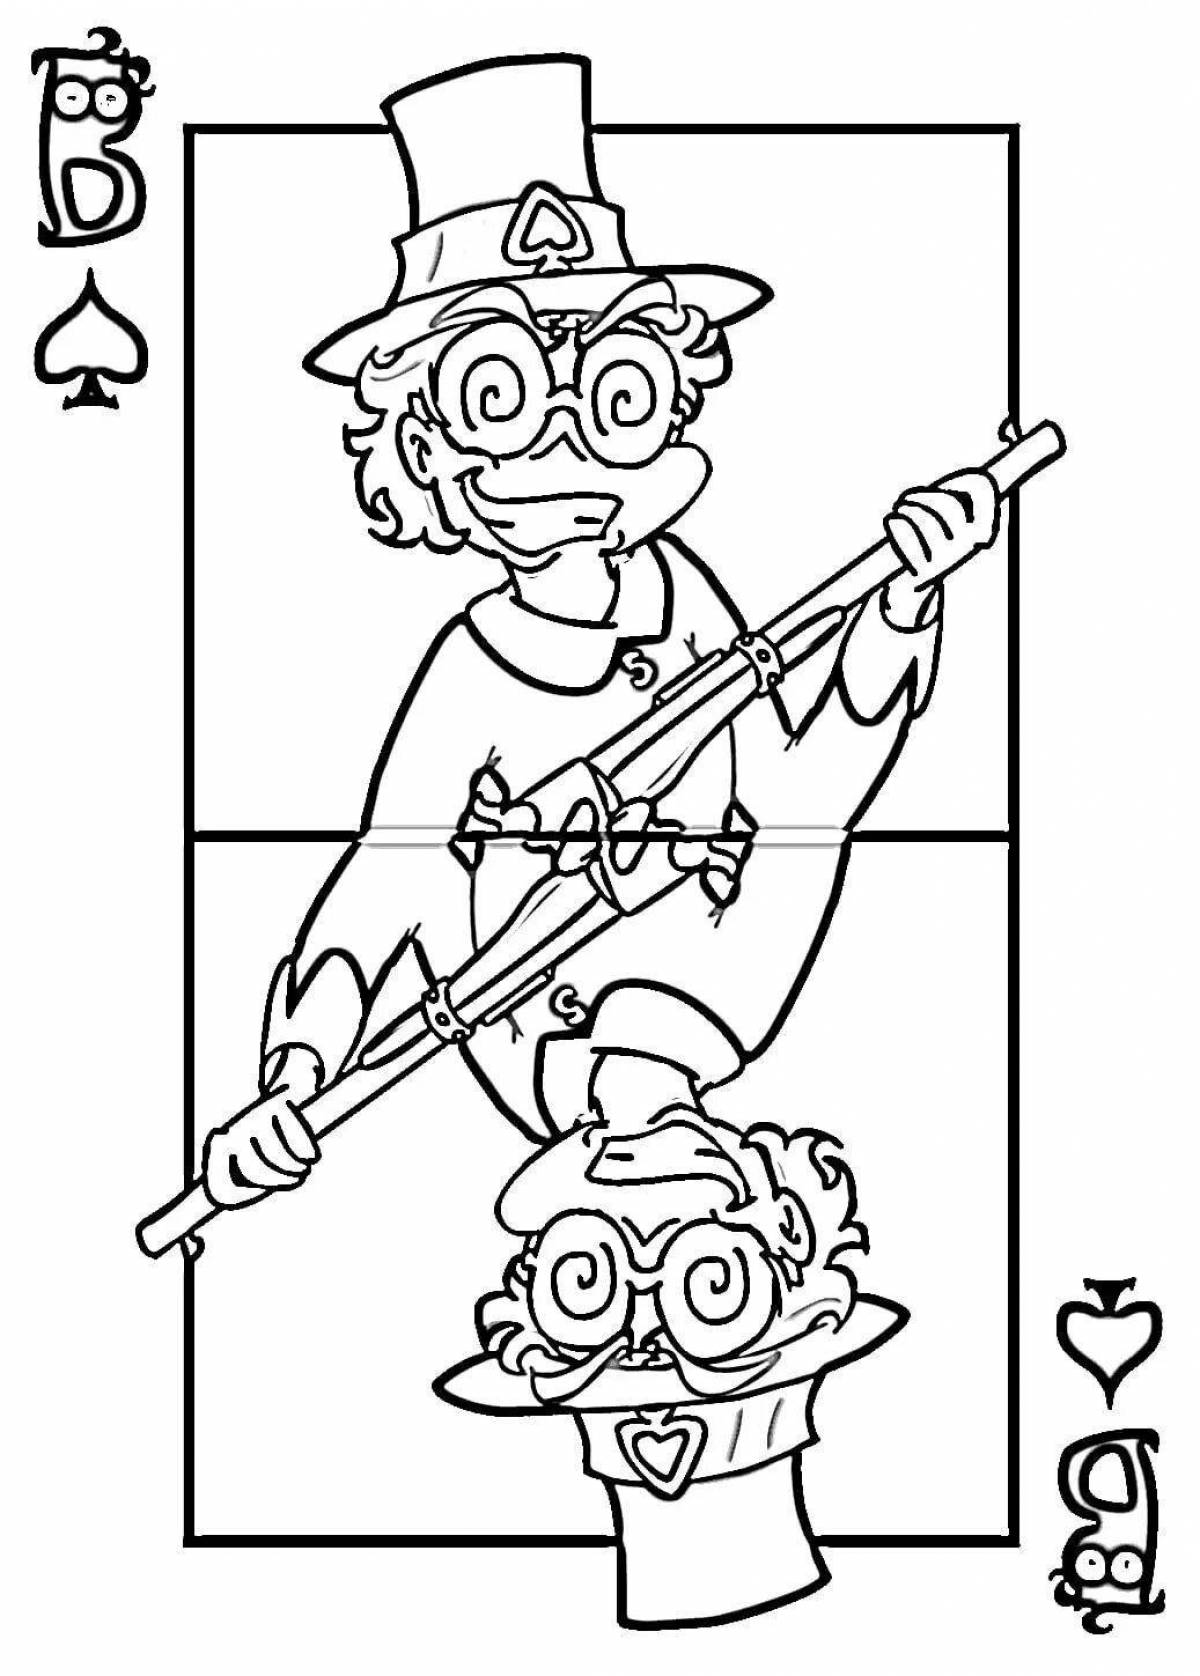 Living romeo 13 coloring cards